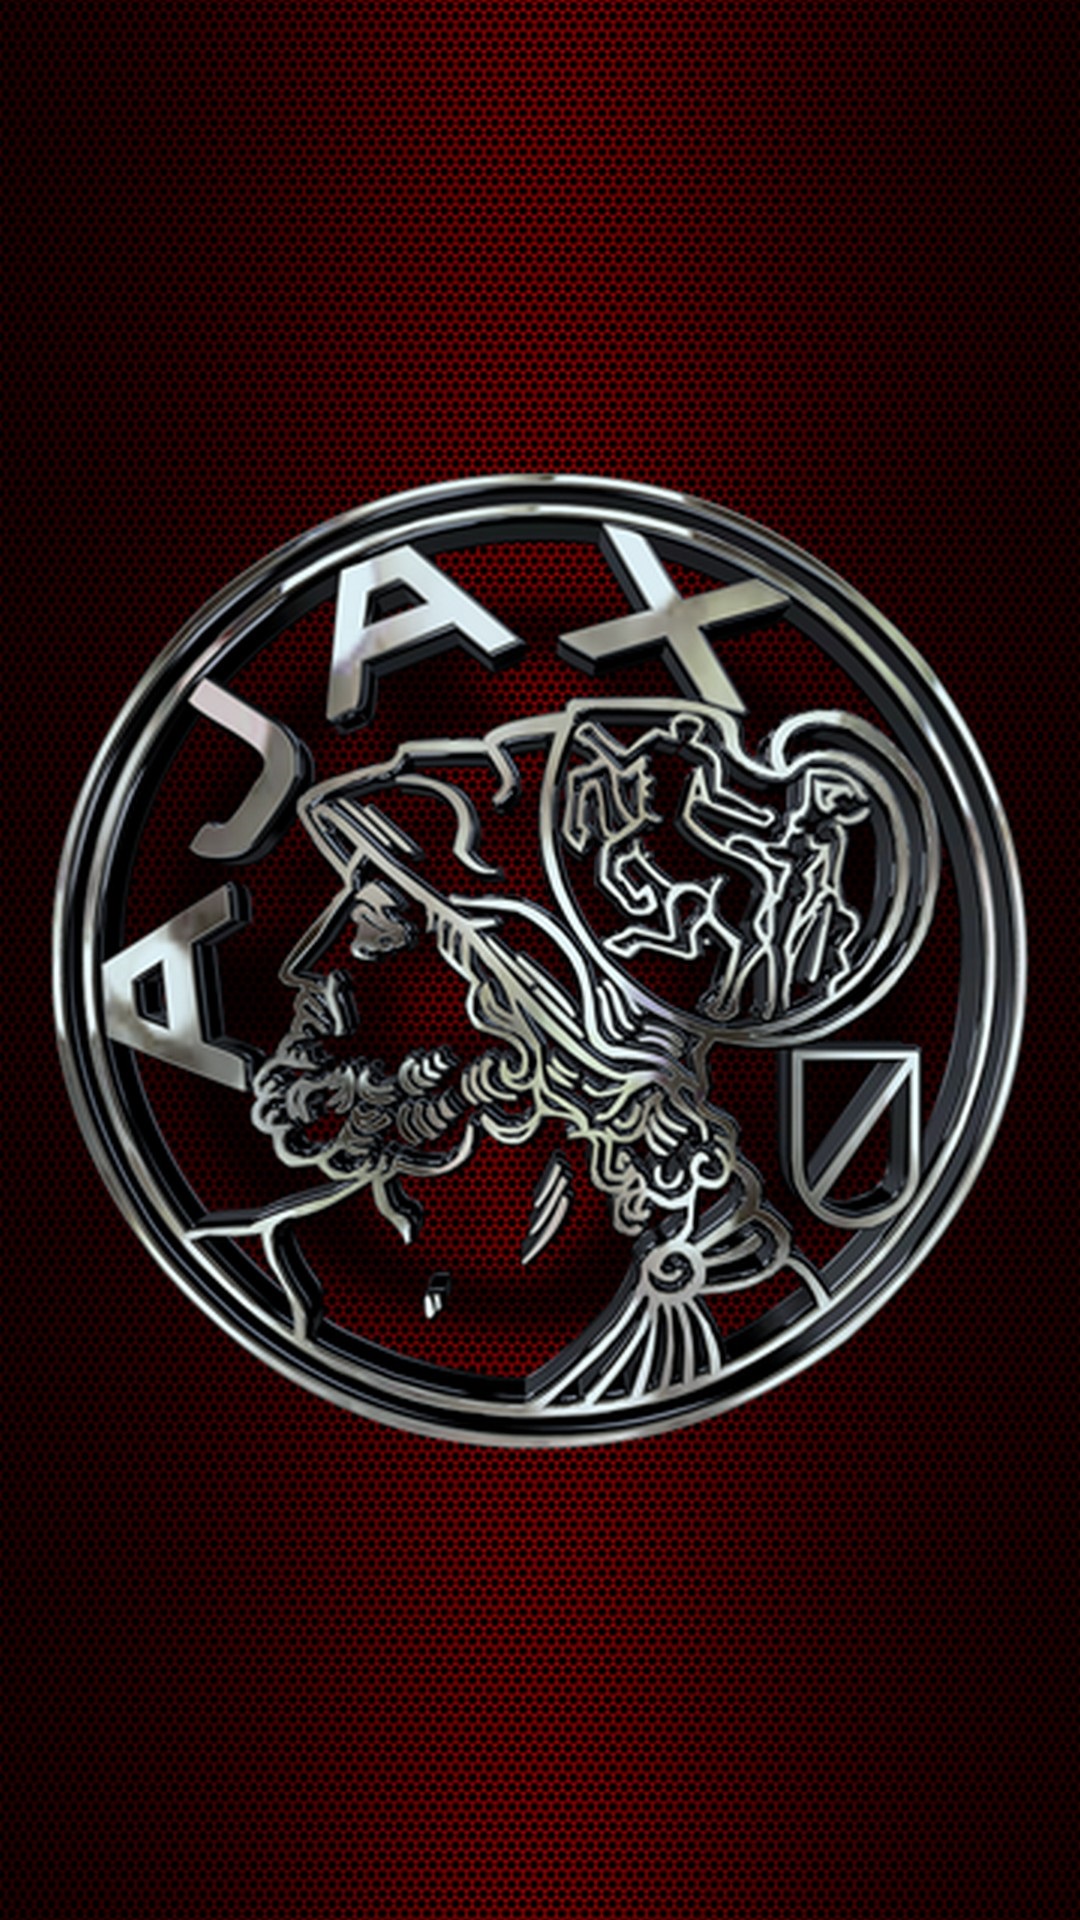 iPhone X Wallpaper Ajax With high-resolution 1080X1920 pixel. You can use this wallpaper for your iPhone 5, 6, 7, 8, X, XS, XR backgrounds, Mobile Screensaver, or iPad Lock Screen